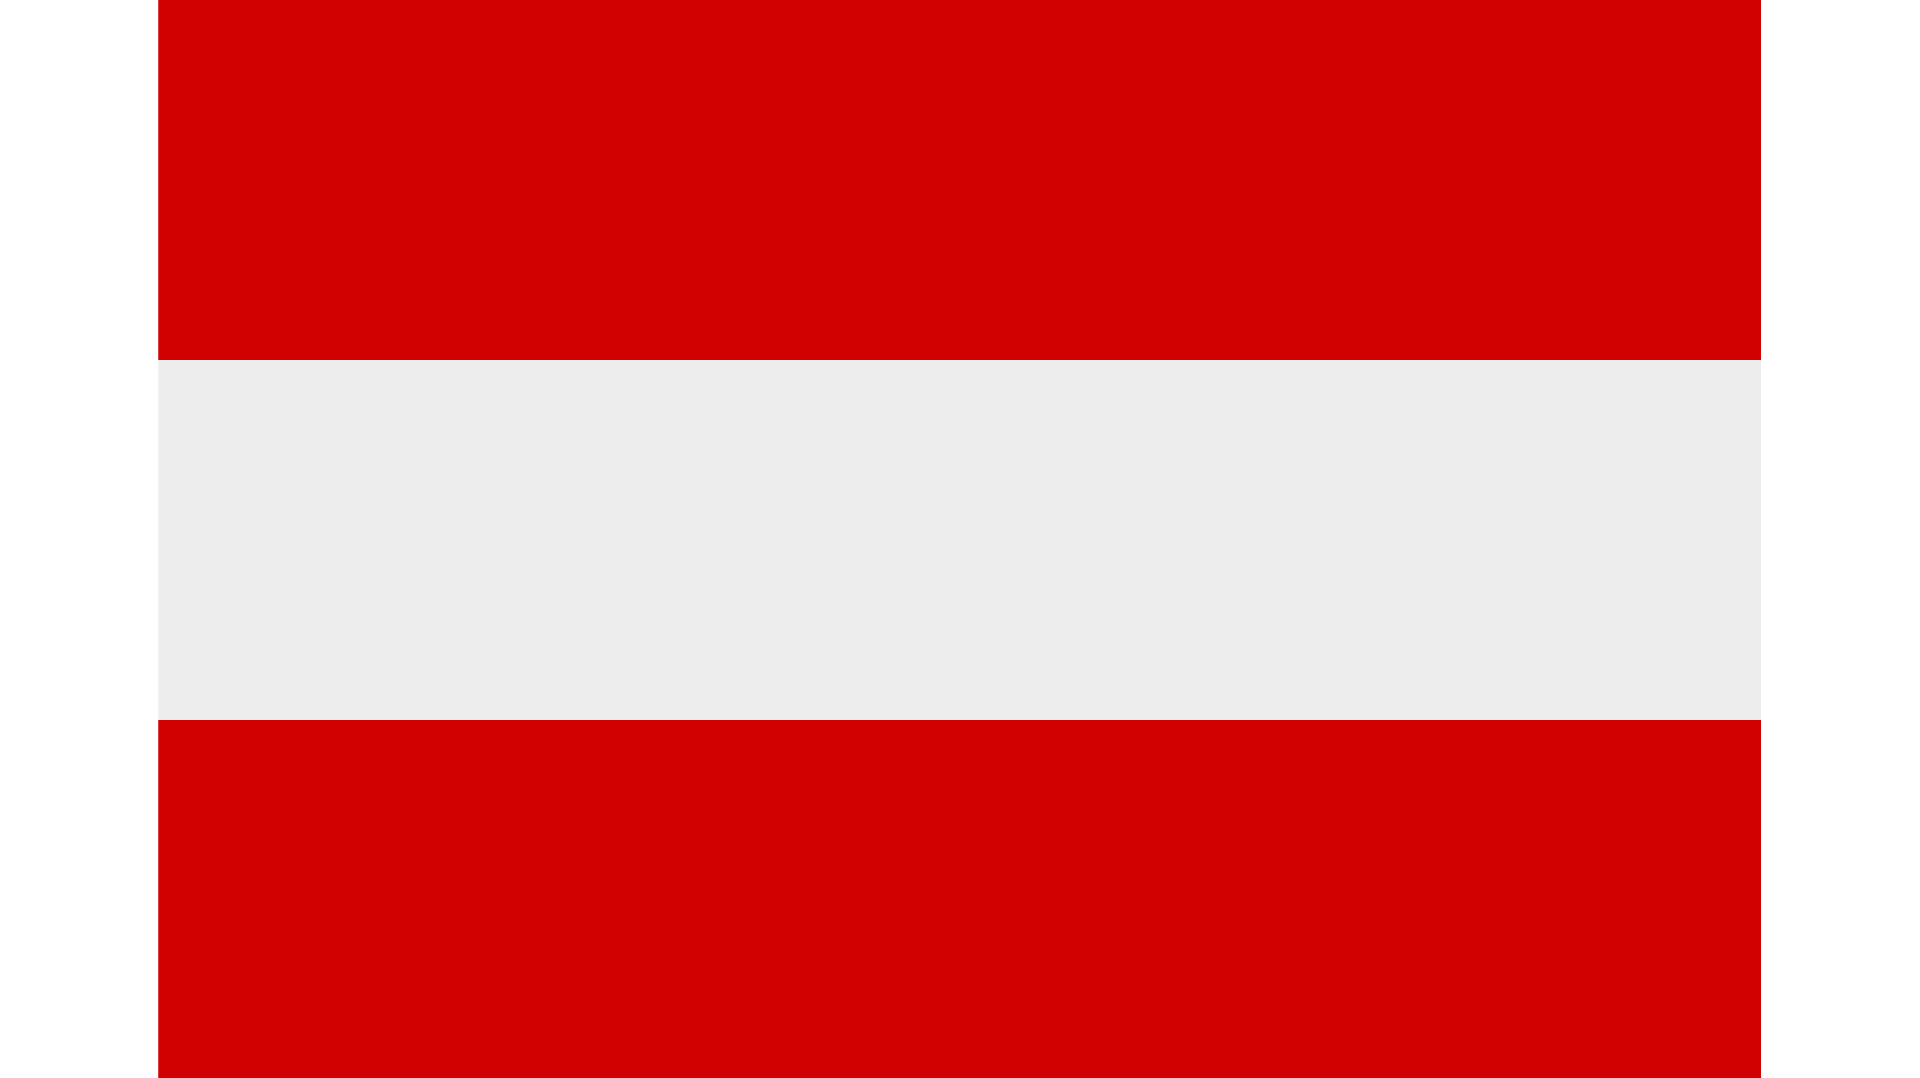 The flag of Austria with two red and one strip horizontally.